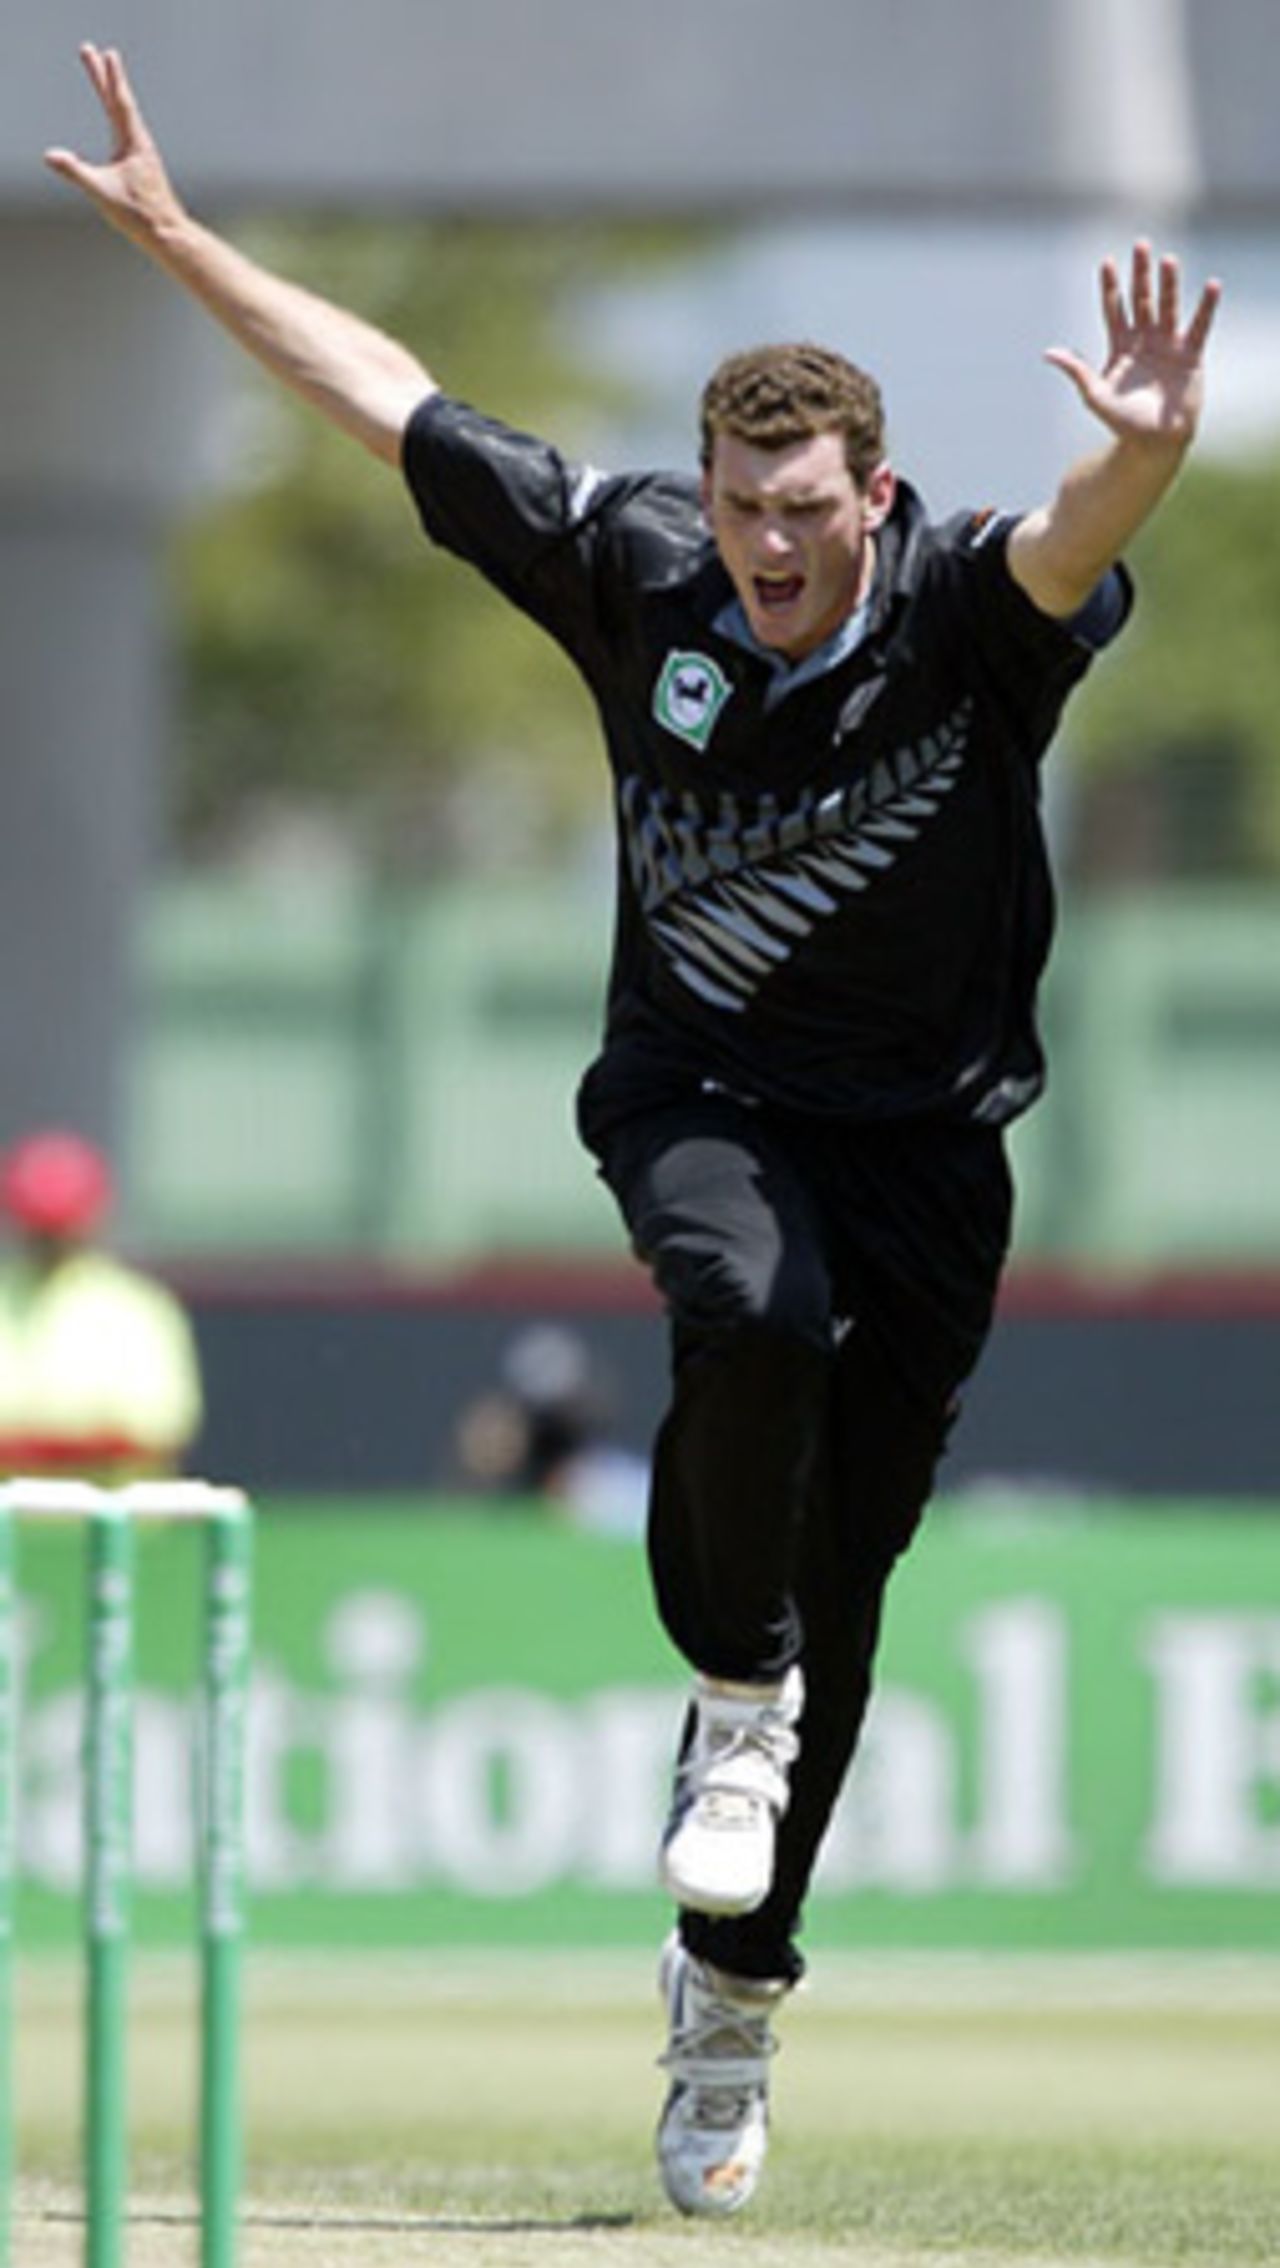 New Zealand bowler Kyle Mills celebrates the dismissal of India batsman Virender Sehwag, caught by wicket-keeper Brendon McCullum for seven. 3rd ODI: New Zealand v India at Jade Stadium, Christchurch, 1 January 2003.